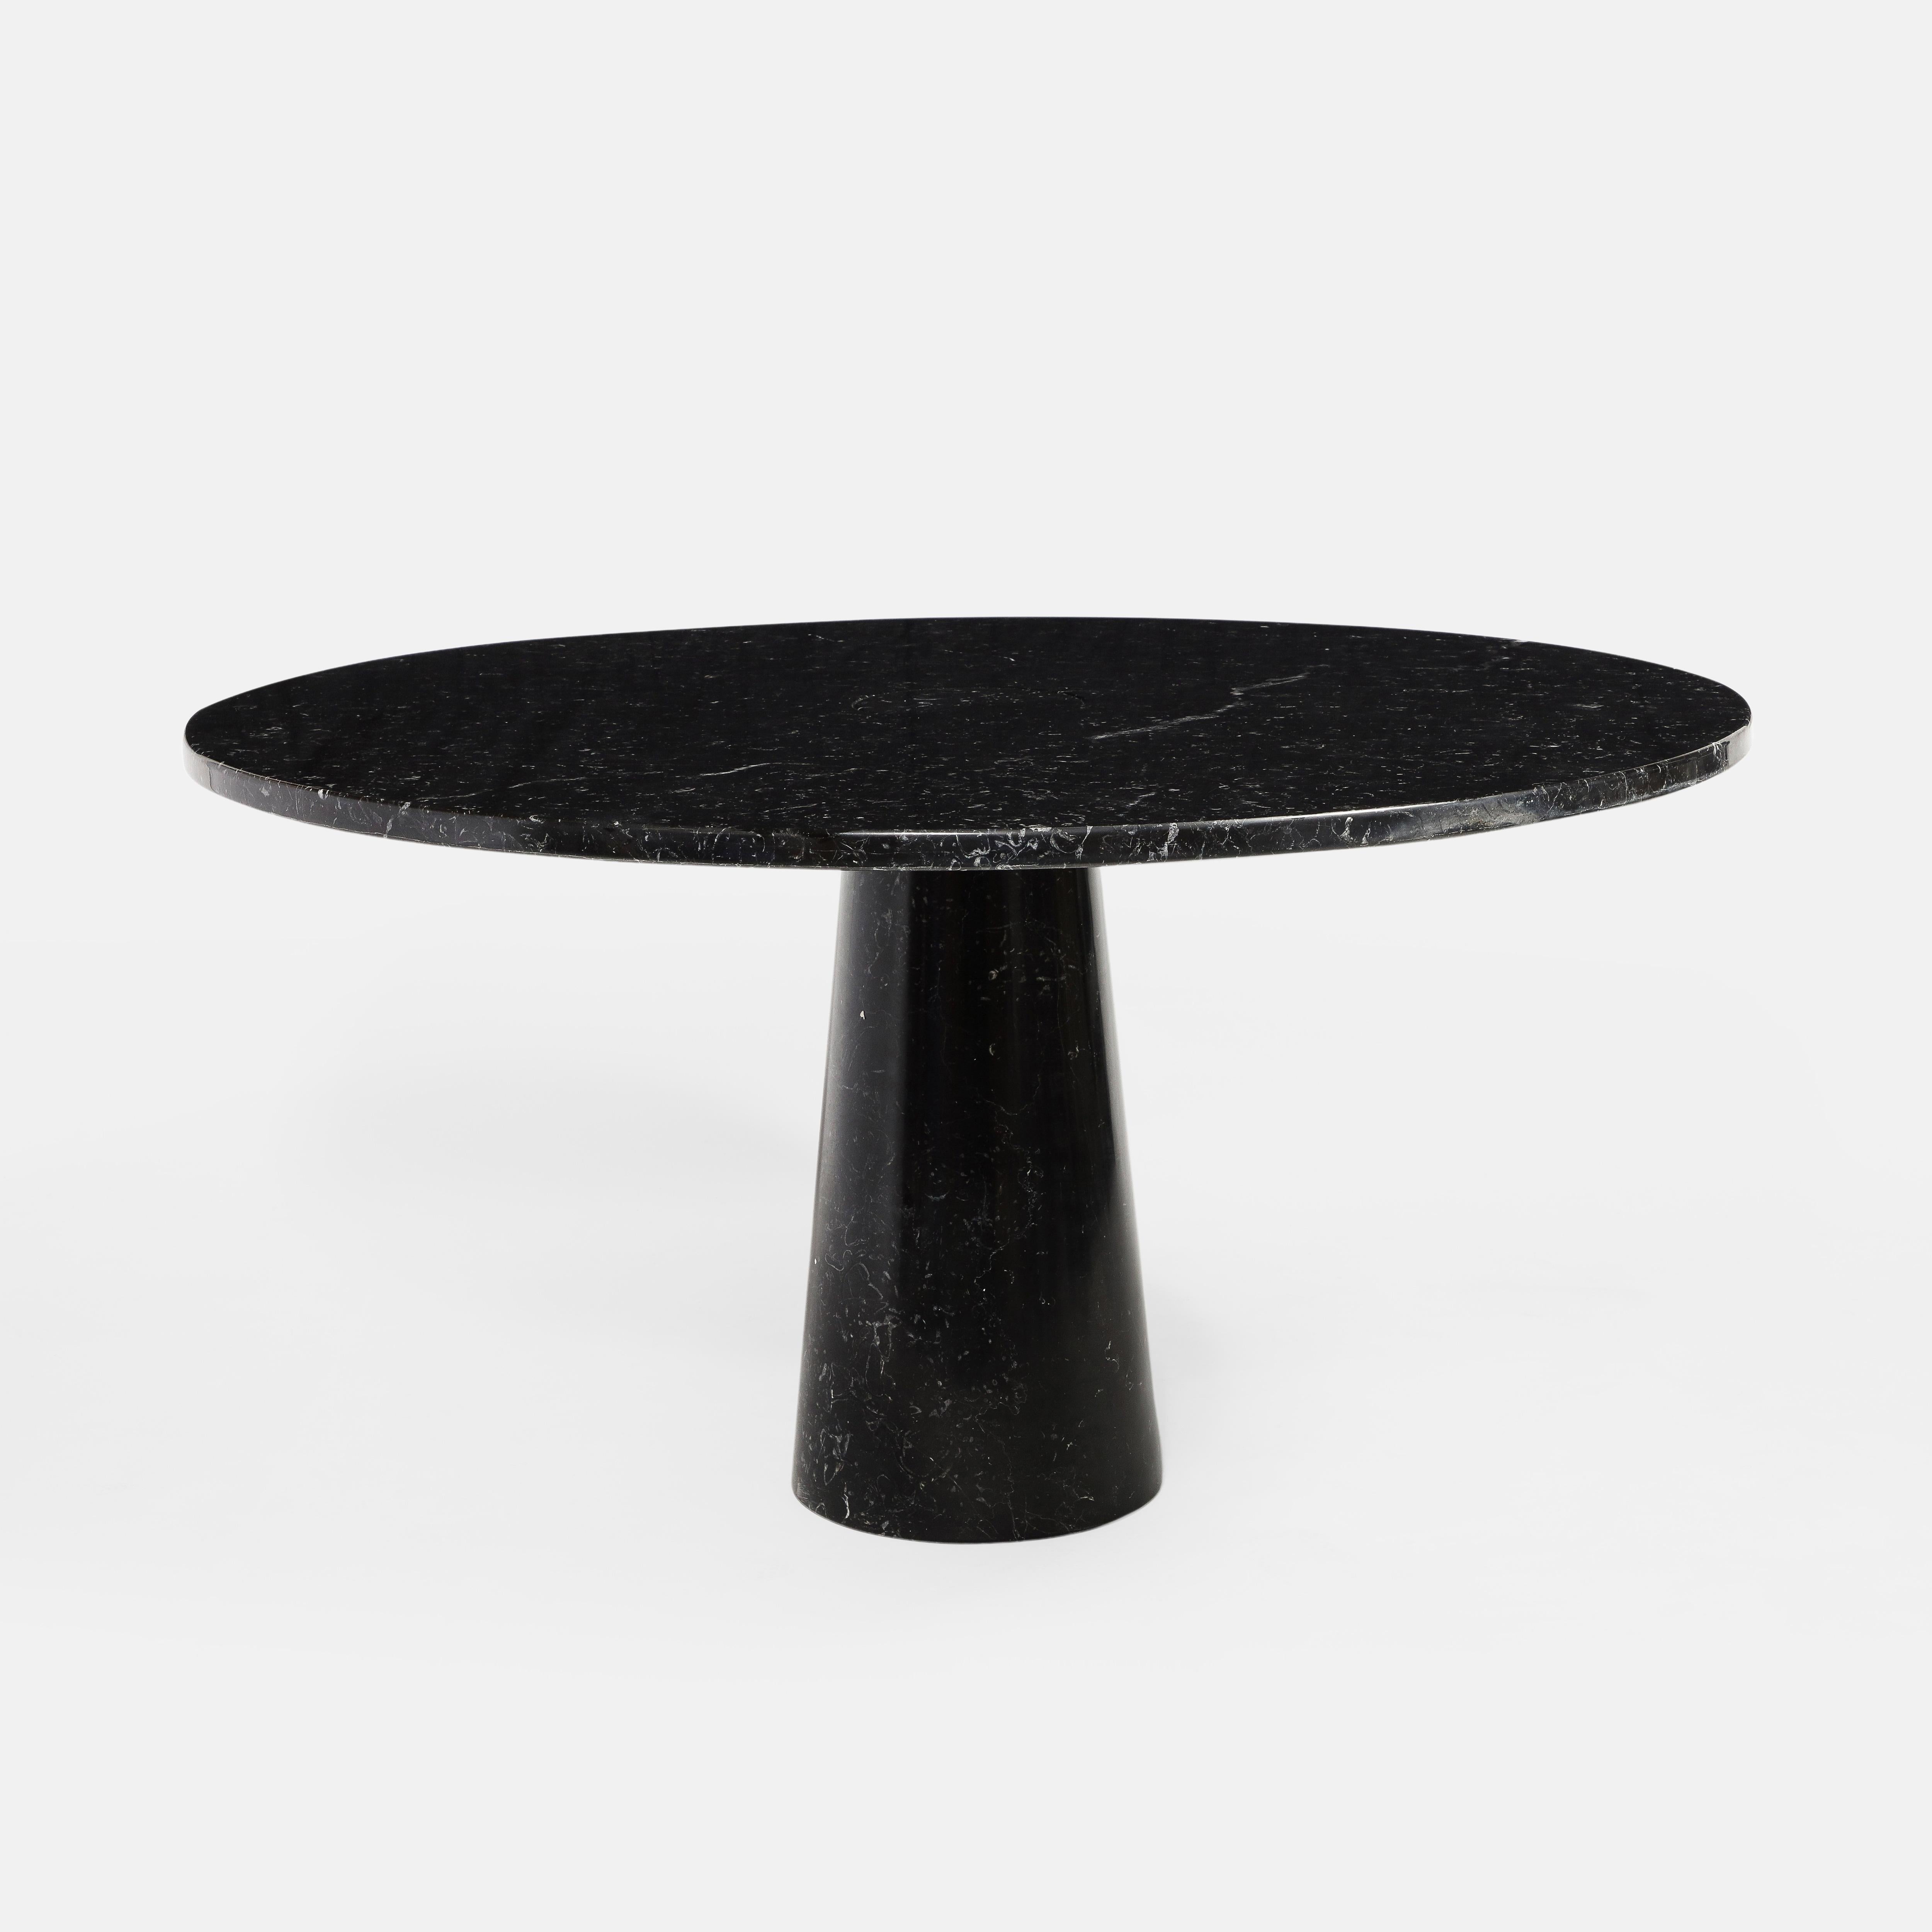 Designed by Angelo Mangiarotti for Skipper from the 'Eros' series, Nero Marquina marble round dining or center table with top fitted on a conical base. This elegant organic table has beautiful subtle veining throughout the black Marquina marble.